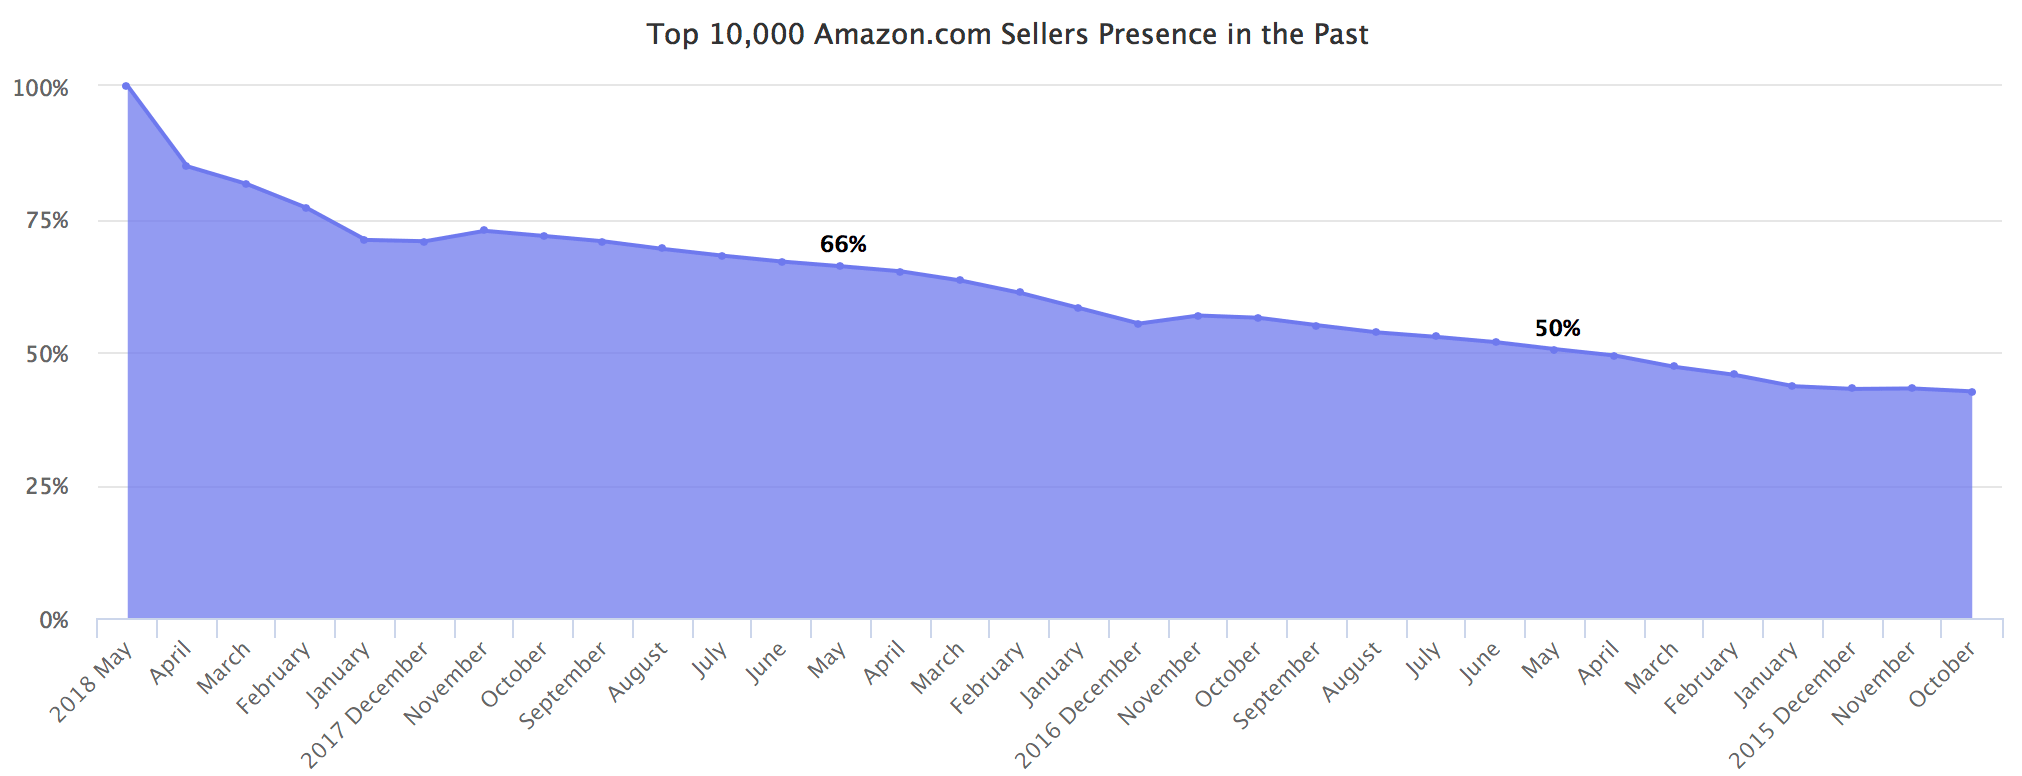 Top 10,000 Amazon.com Sellers Presence in the Past